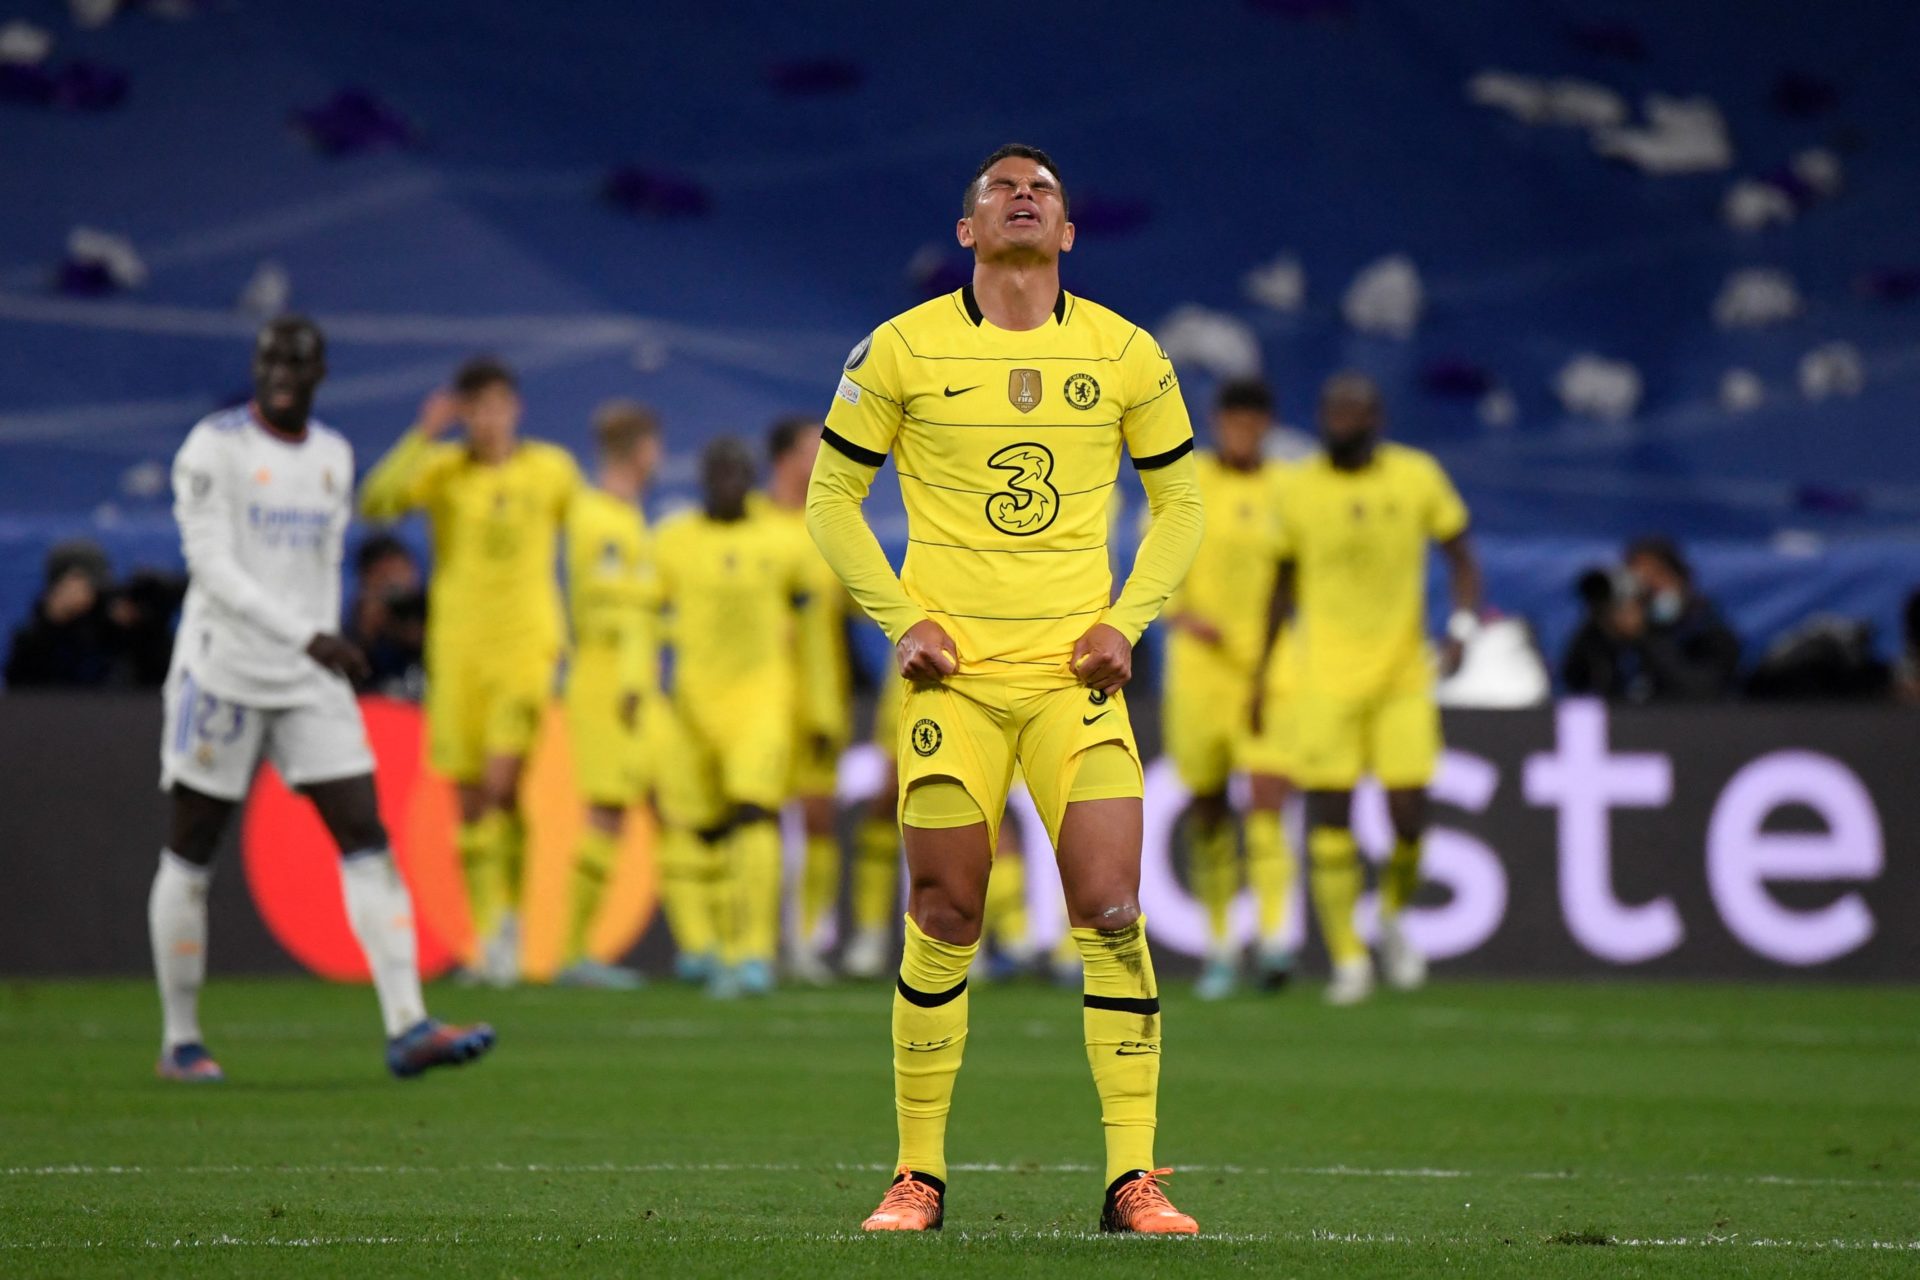 Thiago Silva posts image of hands being tied together after